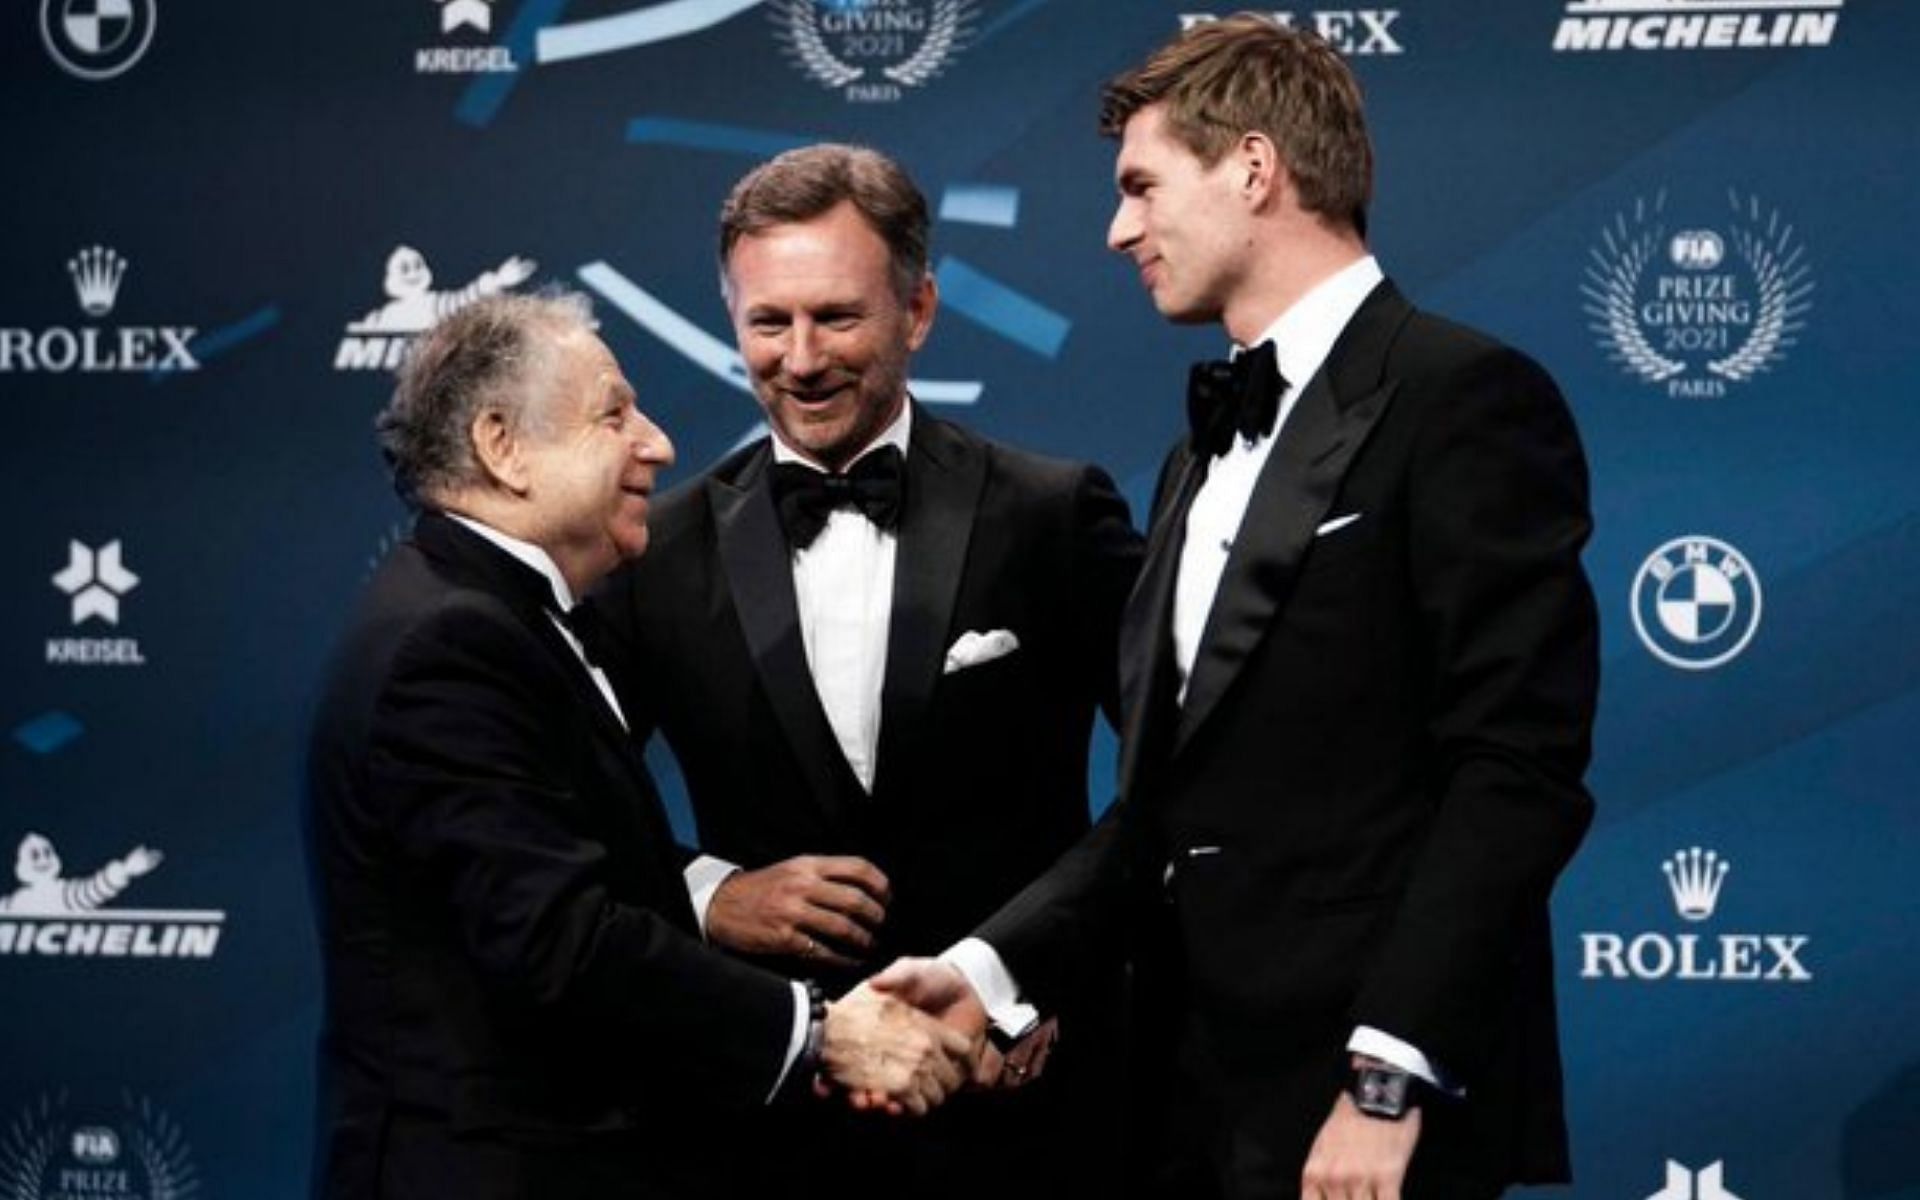 Jean Todt (congratulates) Max Verstappen (right) on his maiden F1 World Championship, as Red Bull team principal Christian Horner (middle) watches on. Courtesy: Jean Todt/@Gazzetta_it